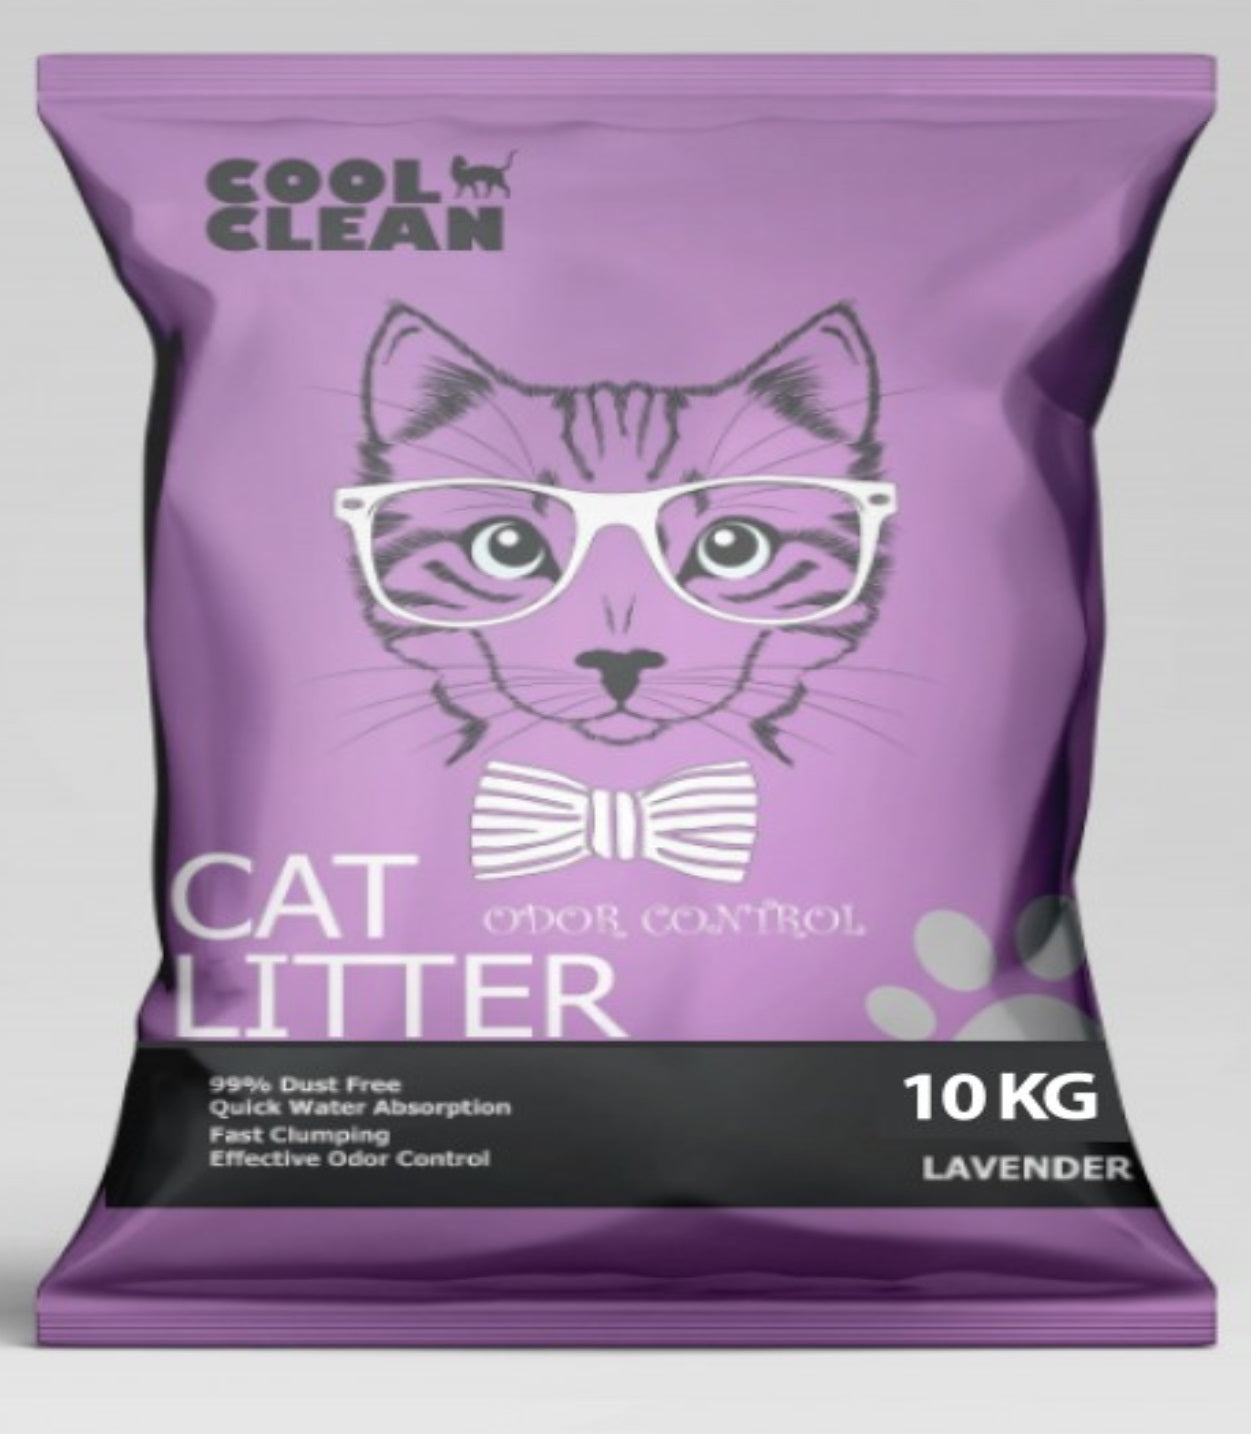 COOL CLEAN Clumping Cat Litter - Lavender Frangrance